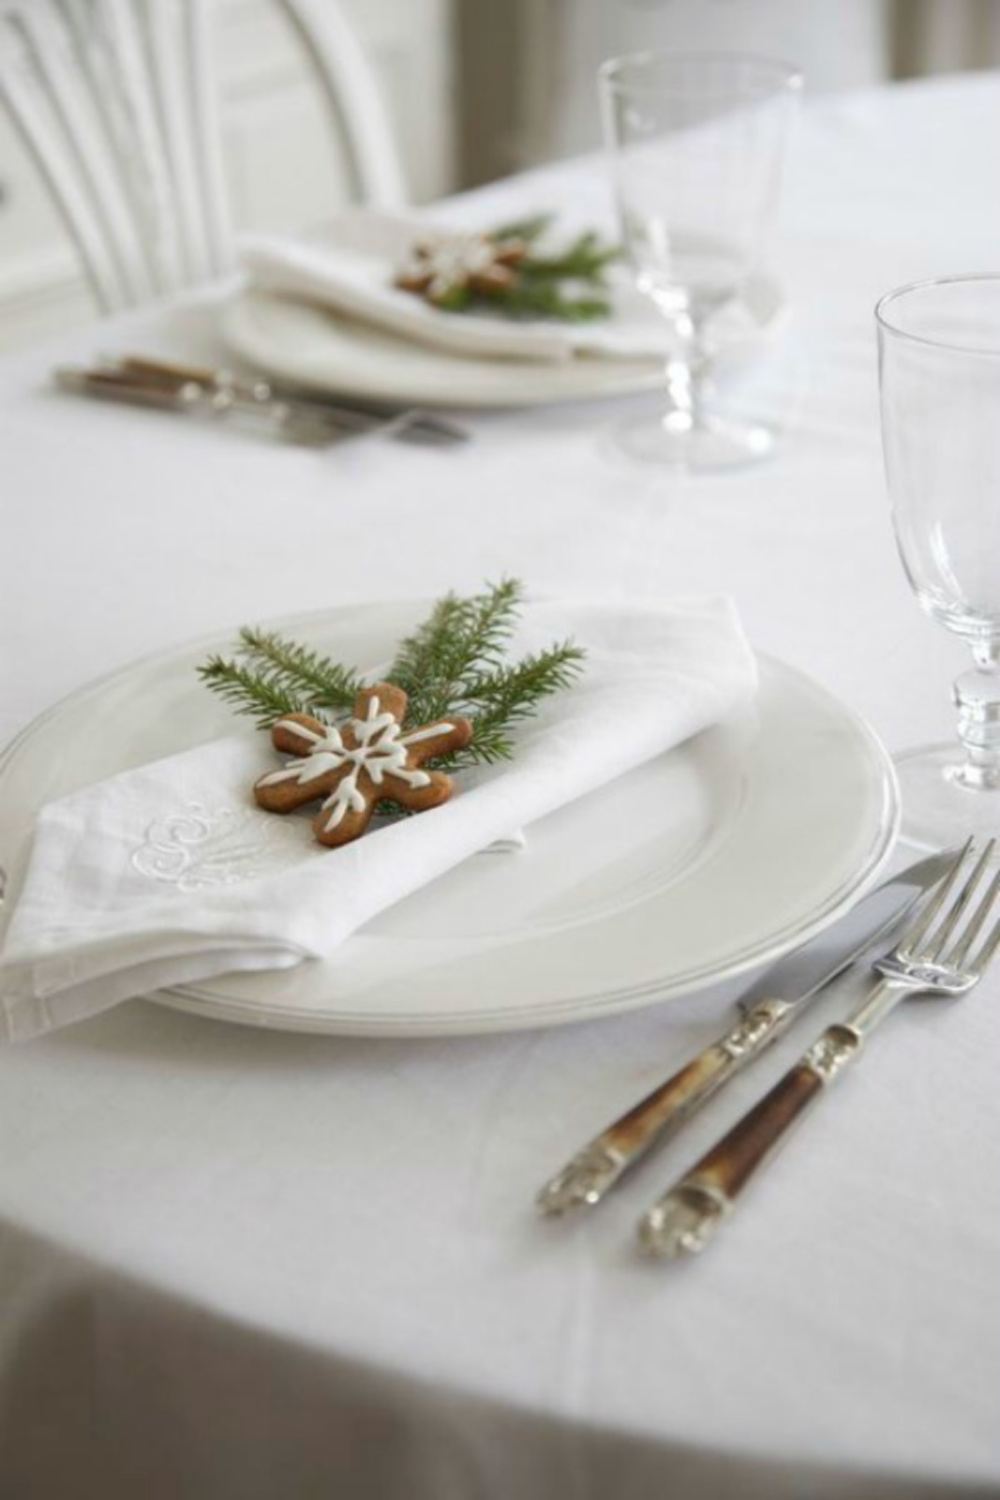 Lovely simple and white Swedish and Scandi Christmas placesetting for a white Christmas -from ljo-s blog.